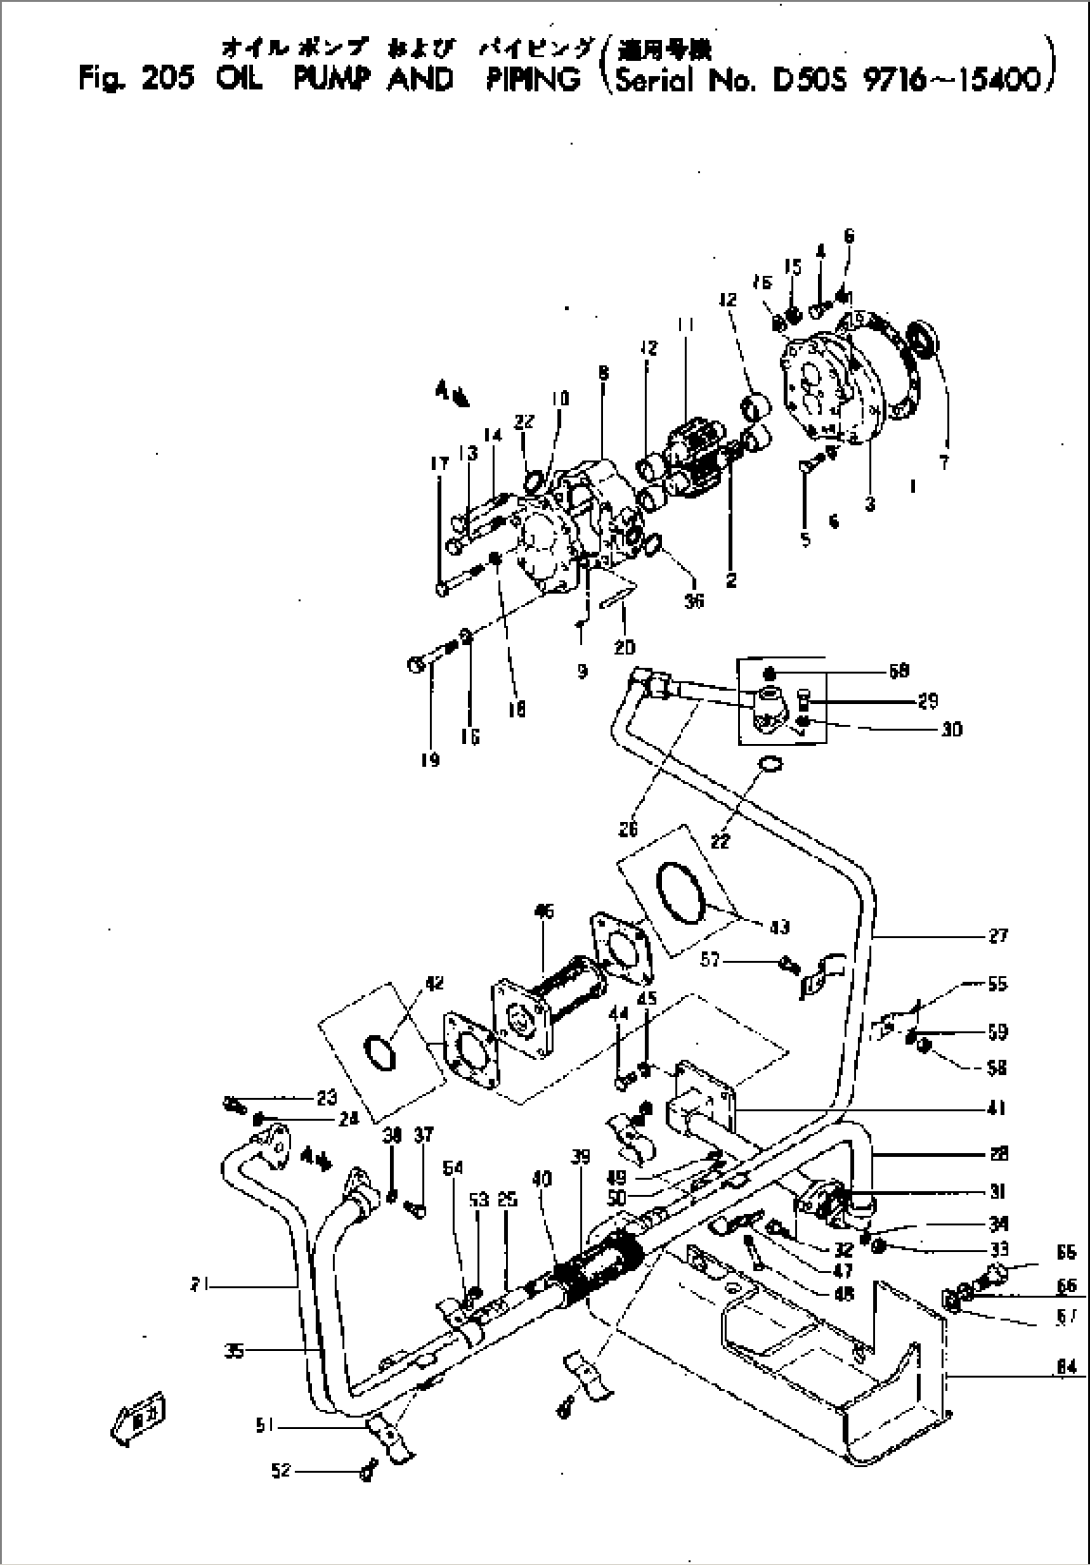 OIL PUMP AND PIPING(#9716-)